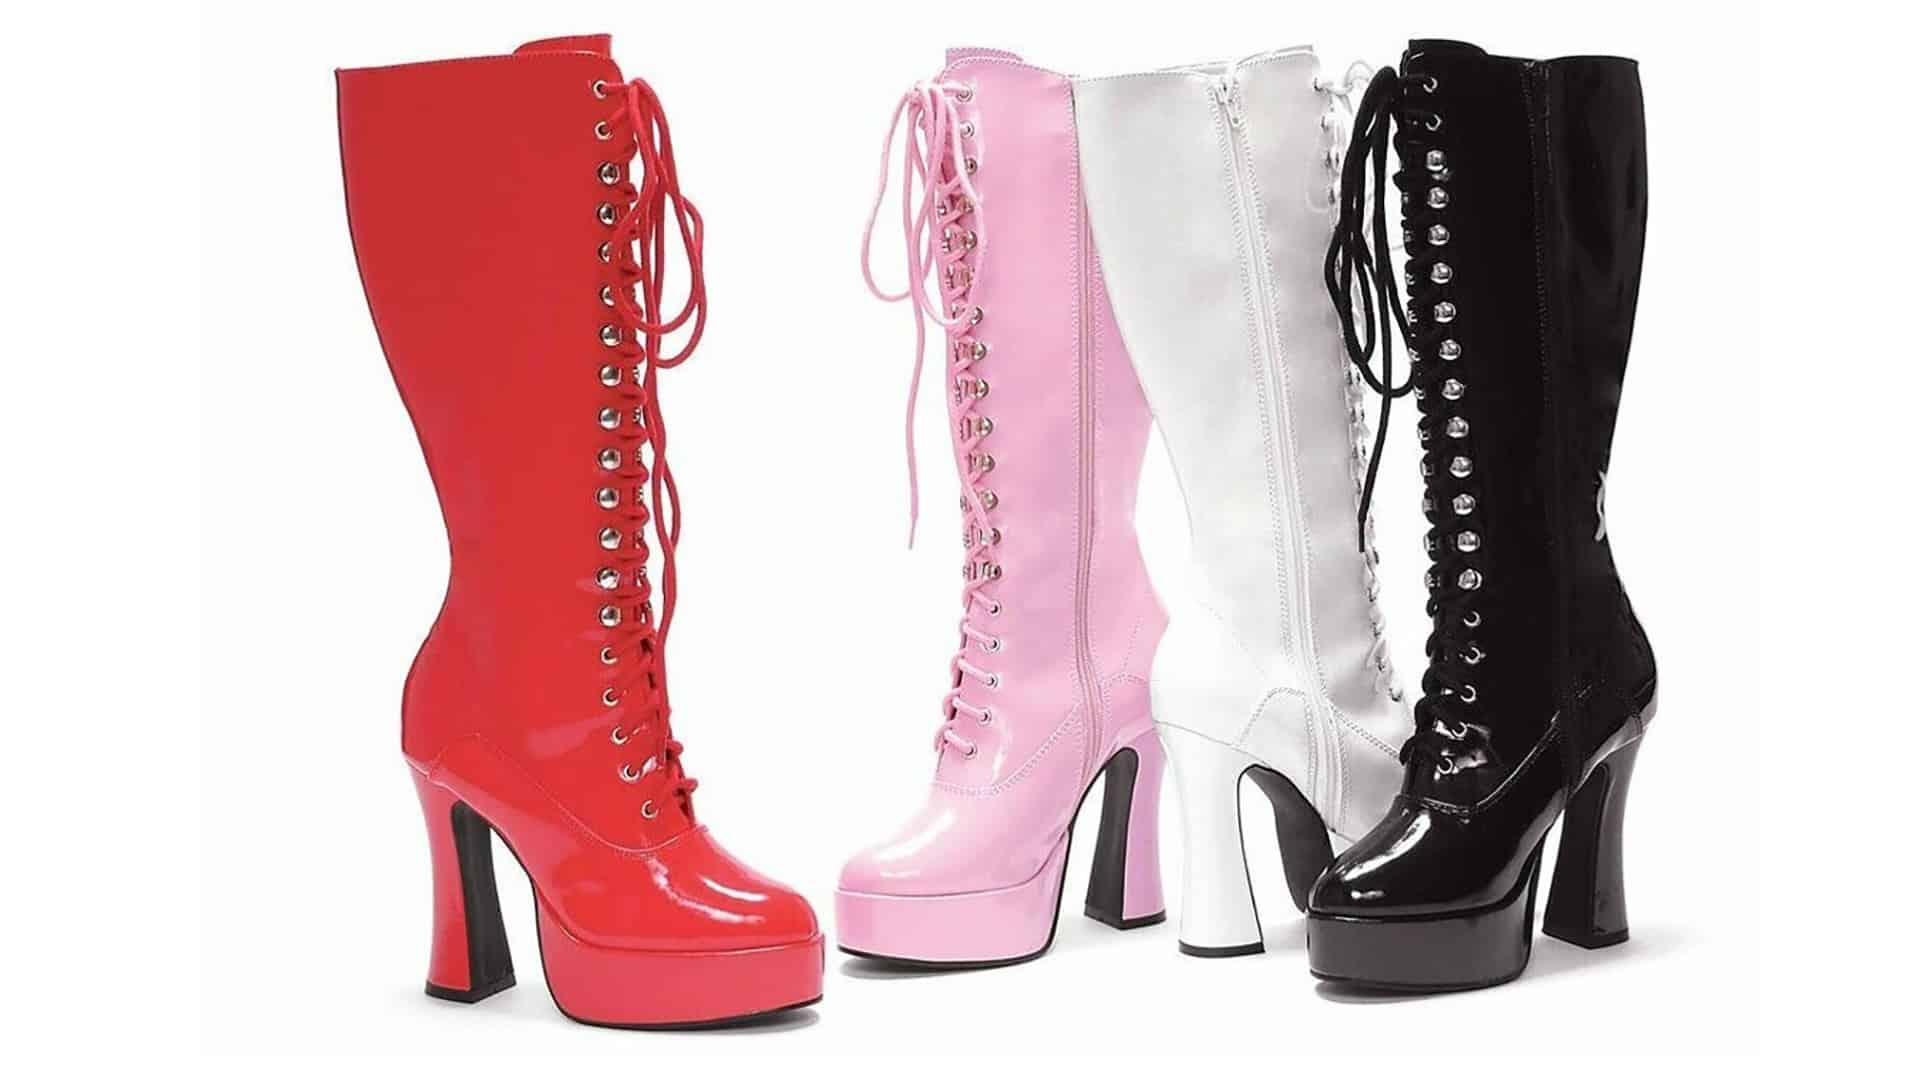 Getting Ready for Fall - 5 of our Favorite Crossdresser Boots